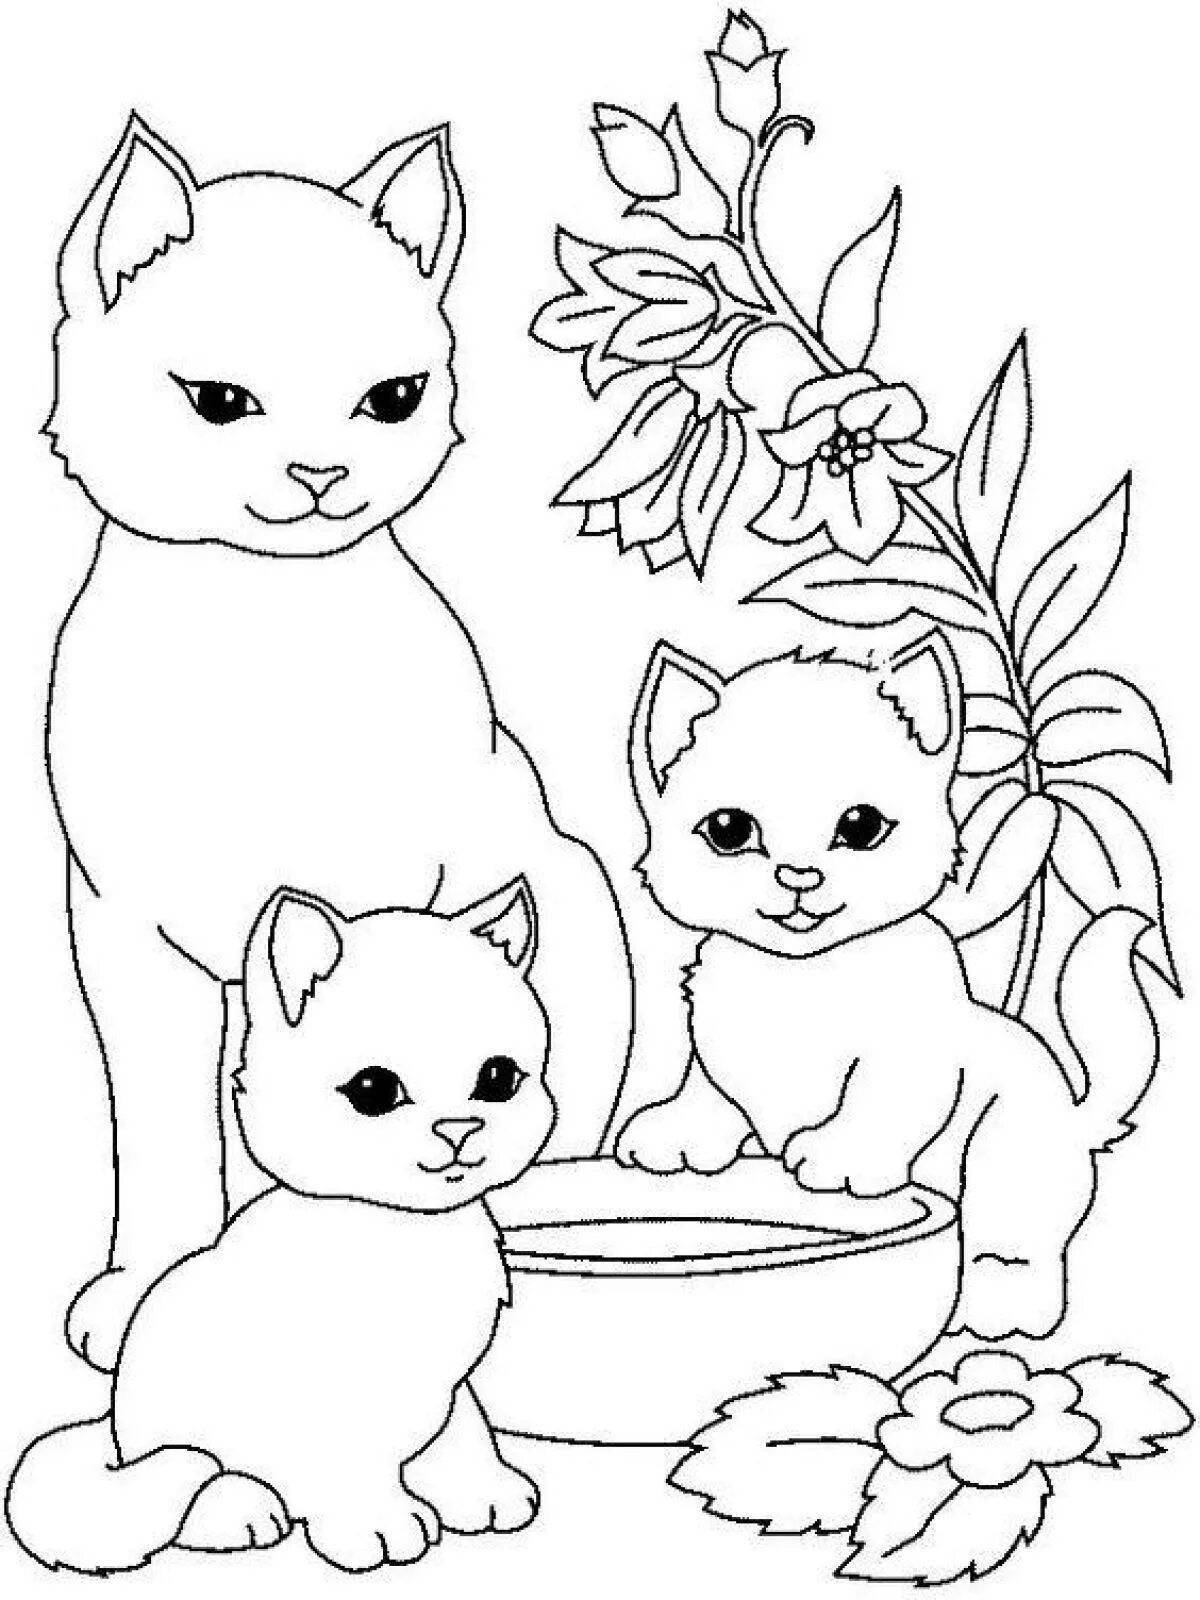 Great coloring book for kids 5-6 years old with cats